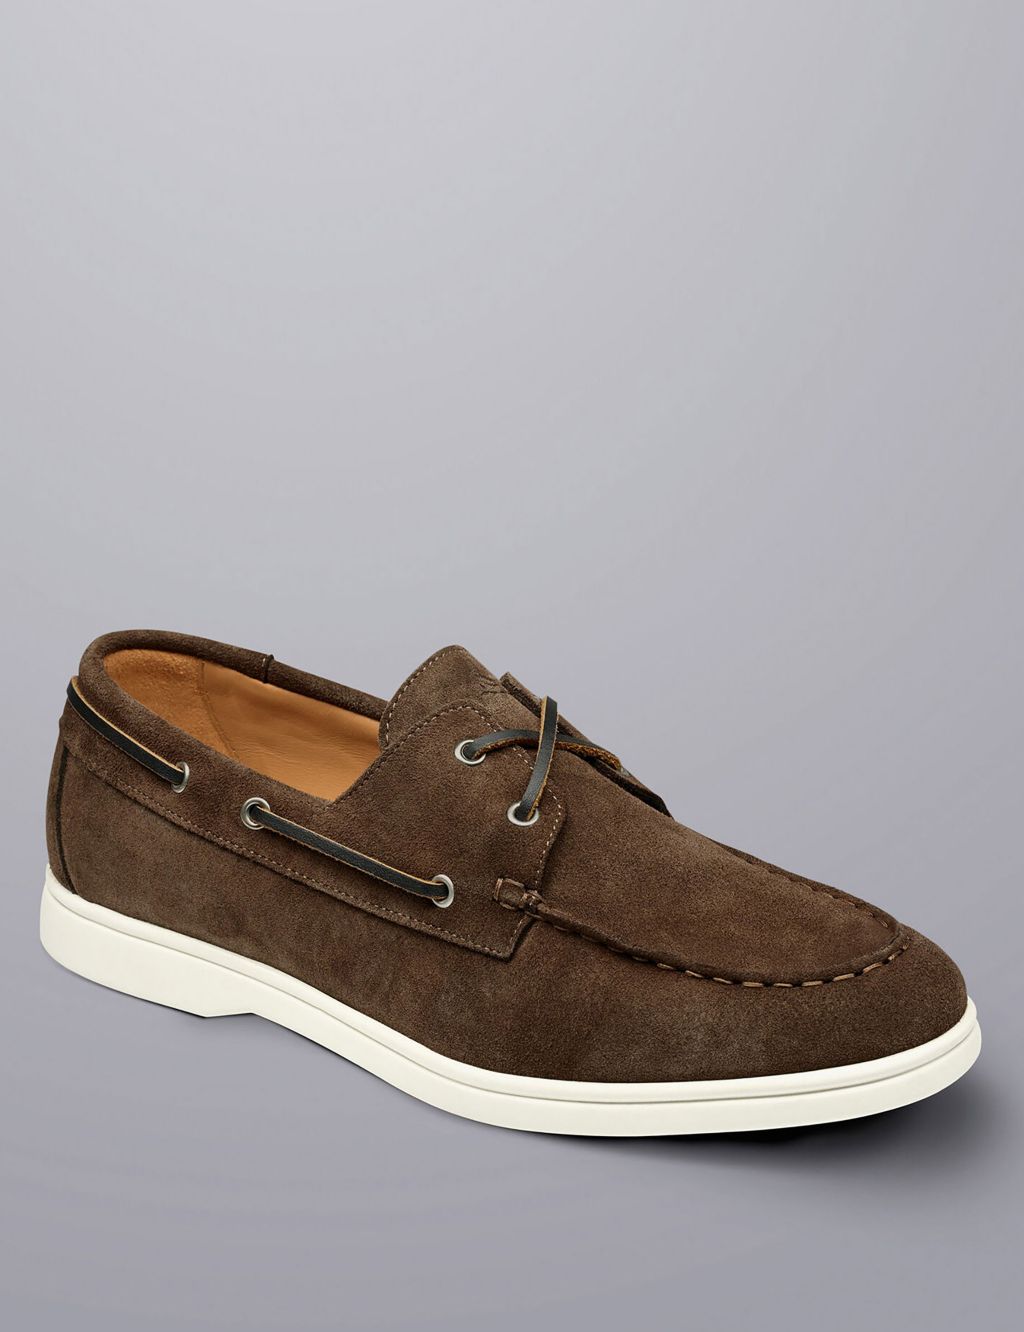 Suede Slip On Boat Shoes image 3